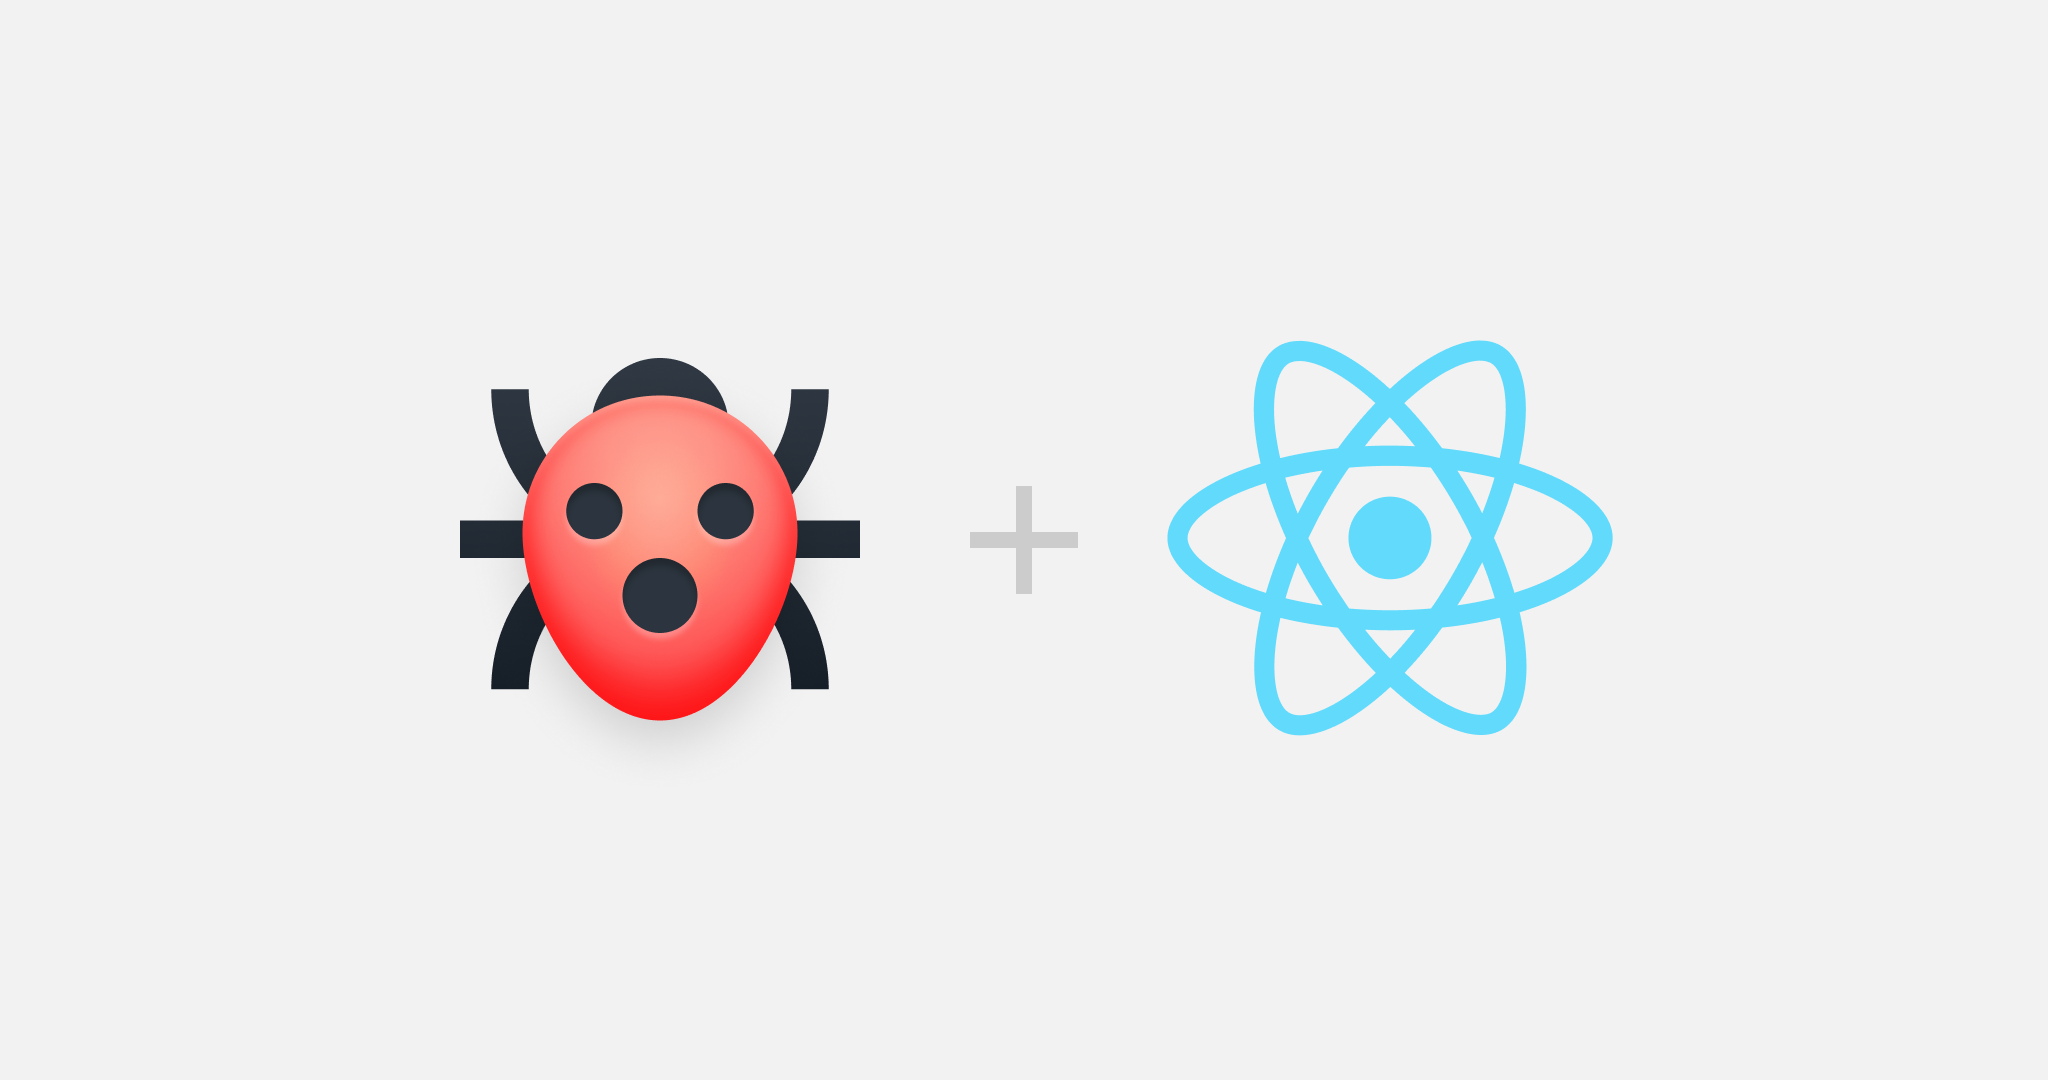 Using the CodyHouse components with React